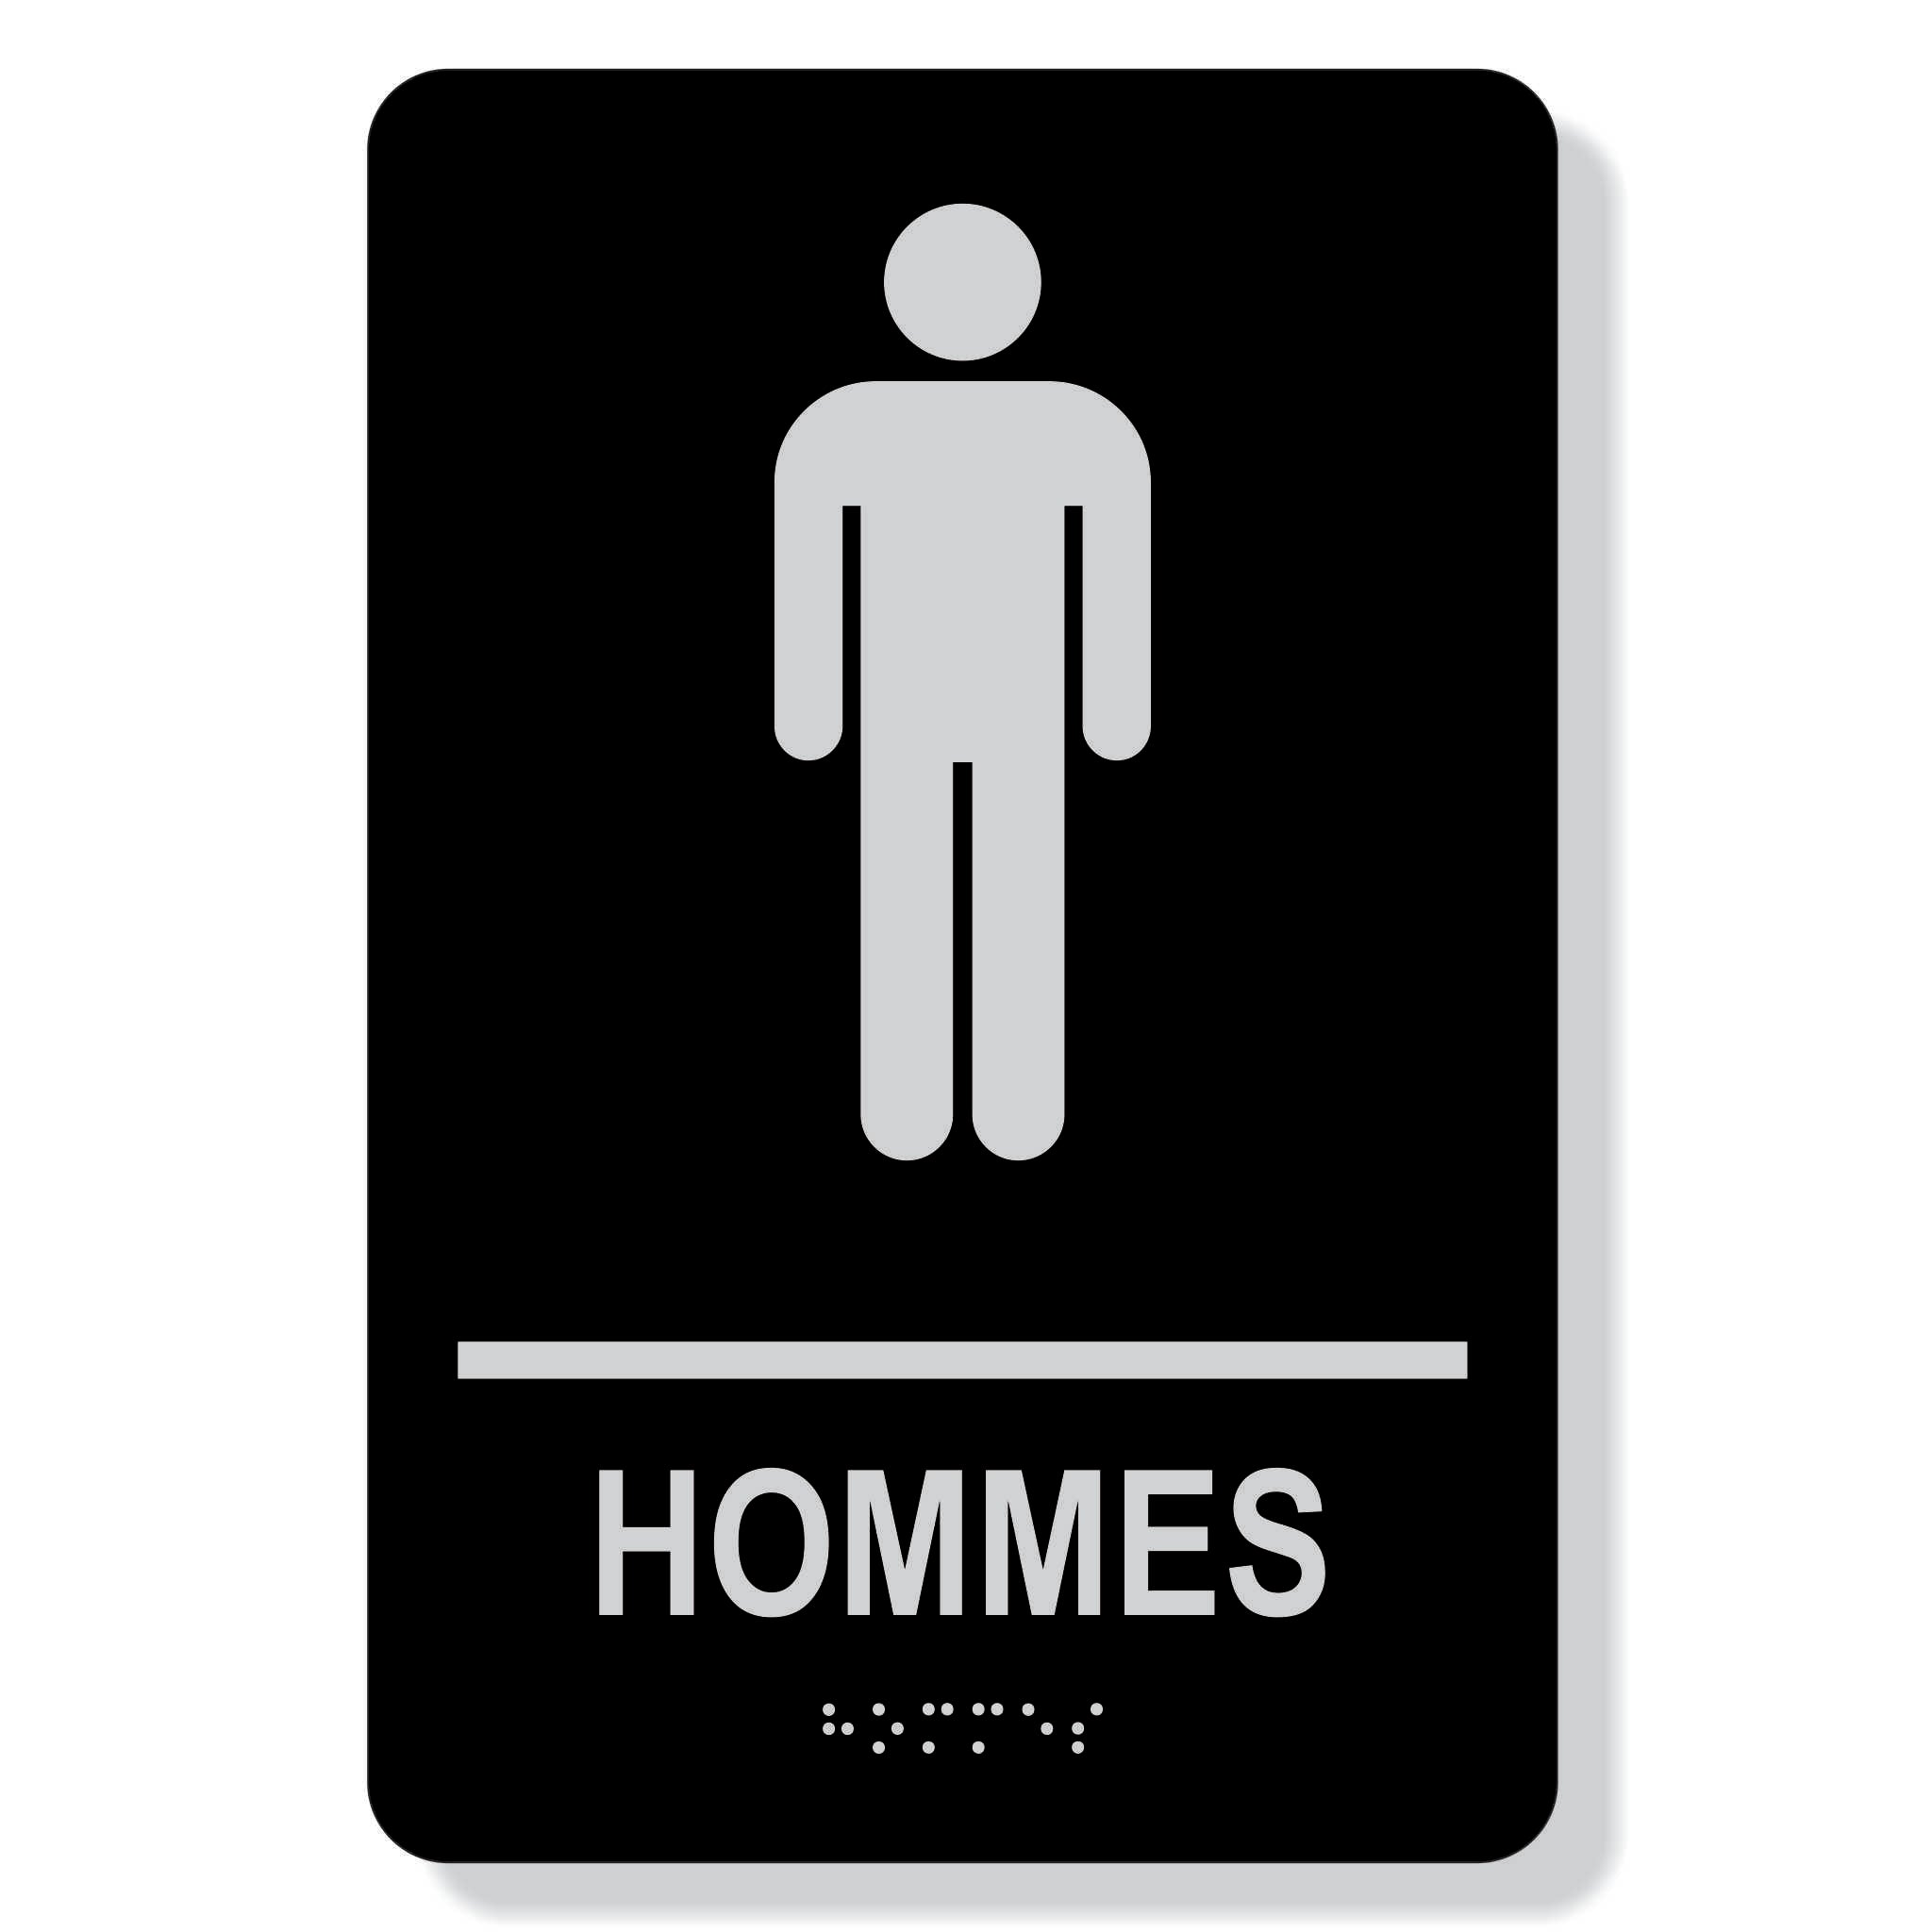 TJX -6" x 9" HOMMES not accessible